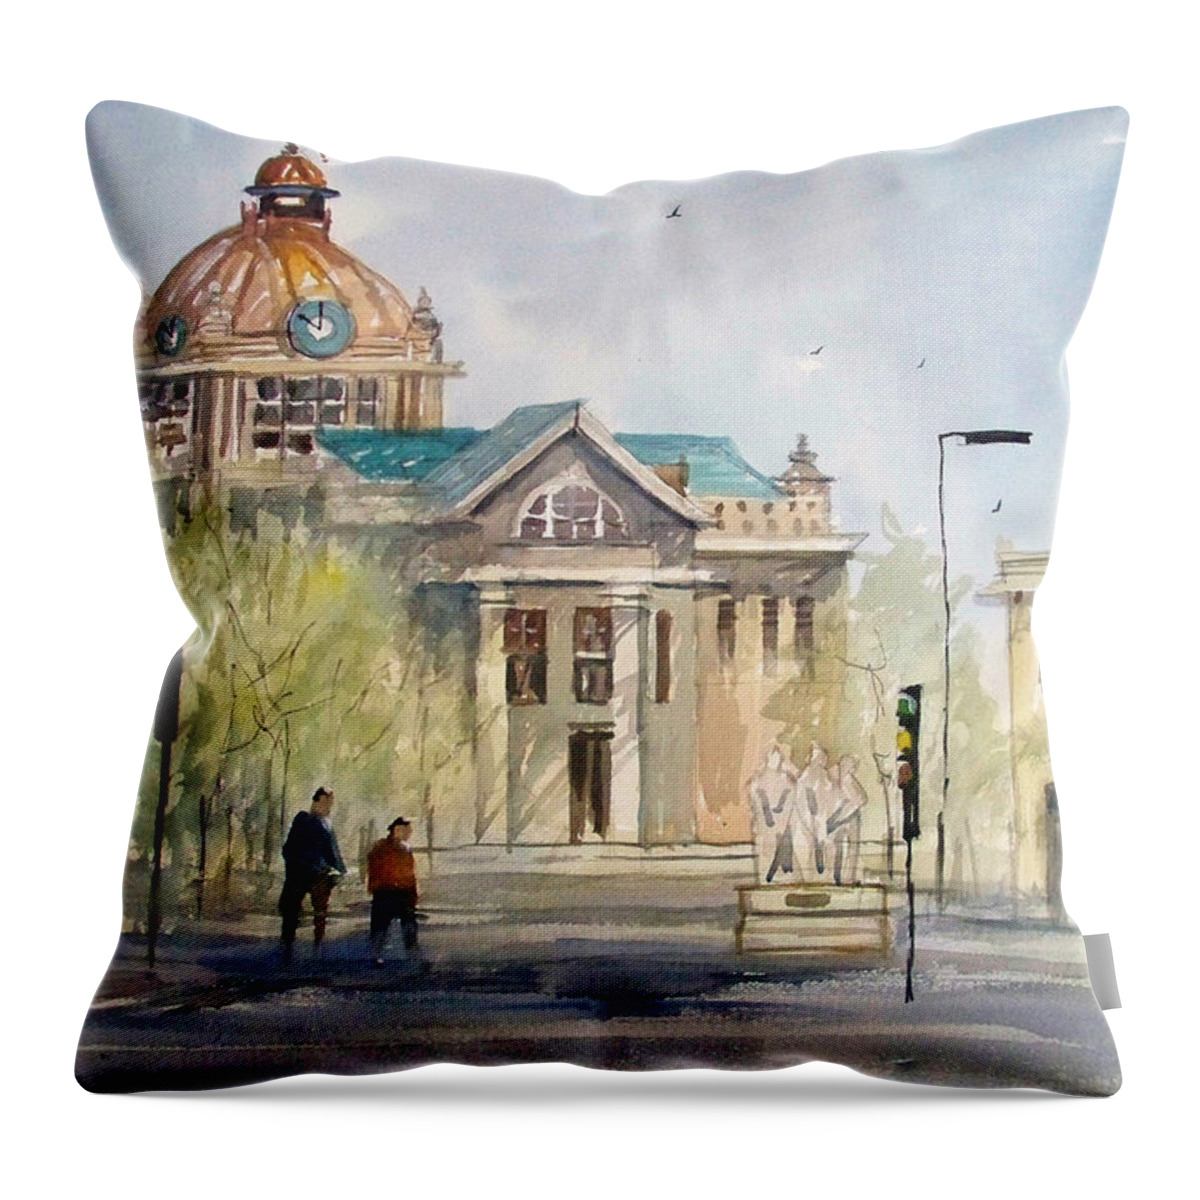 Watercolor Throw Pillow featuring the painting Green Bay Courthouse by Ryan Radke